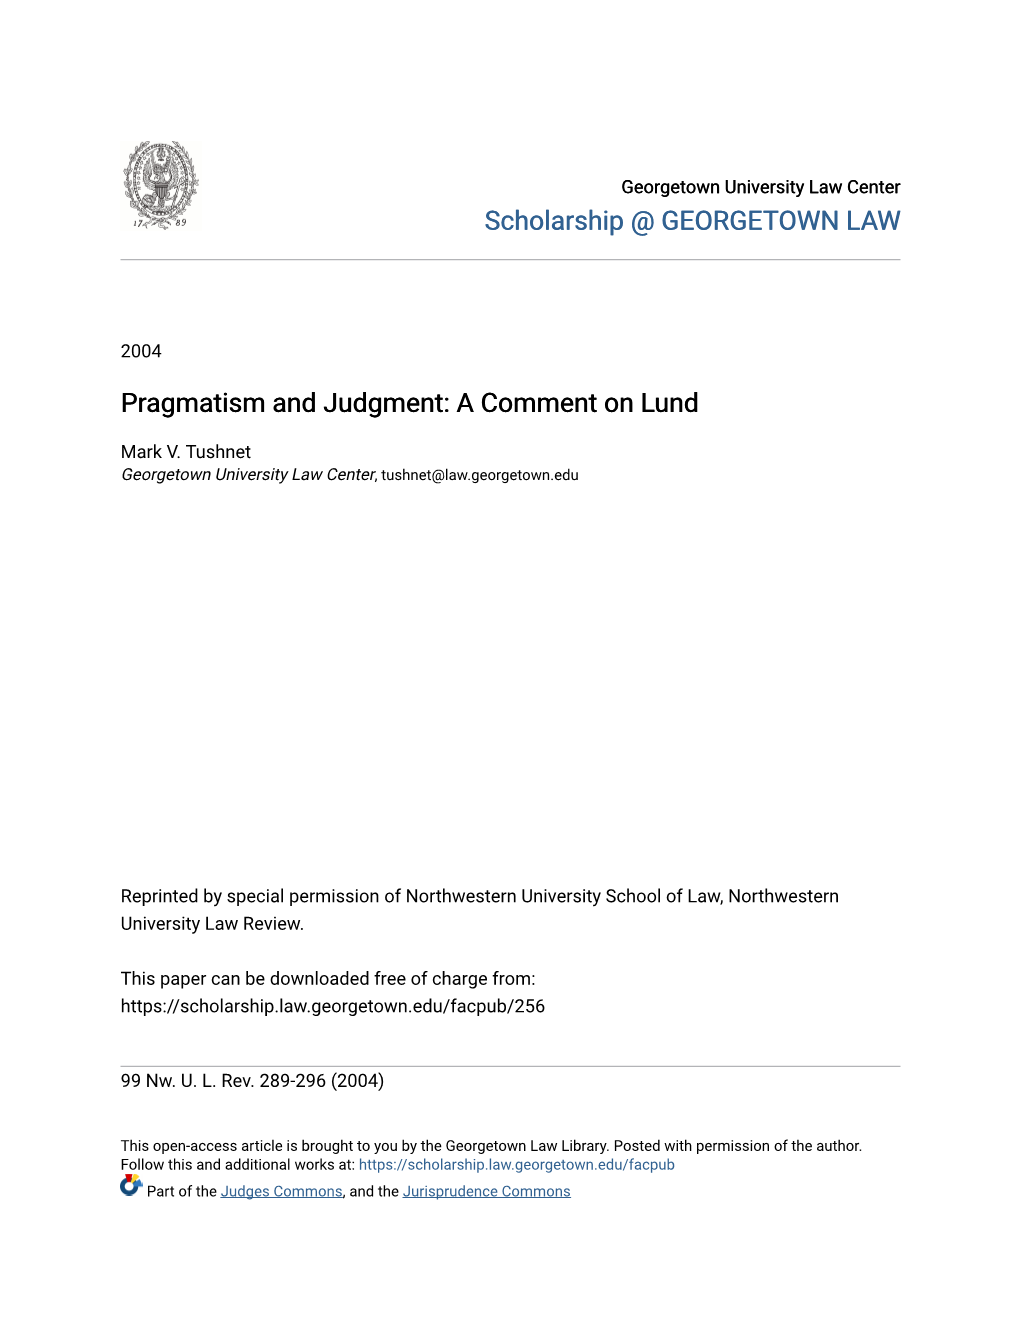 Pragmatism and Judgment: a Comment on Lund